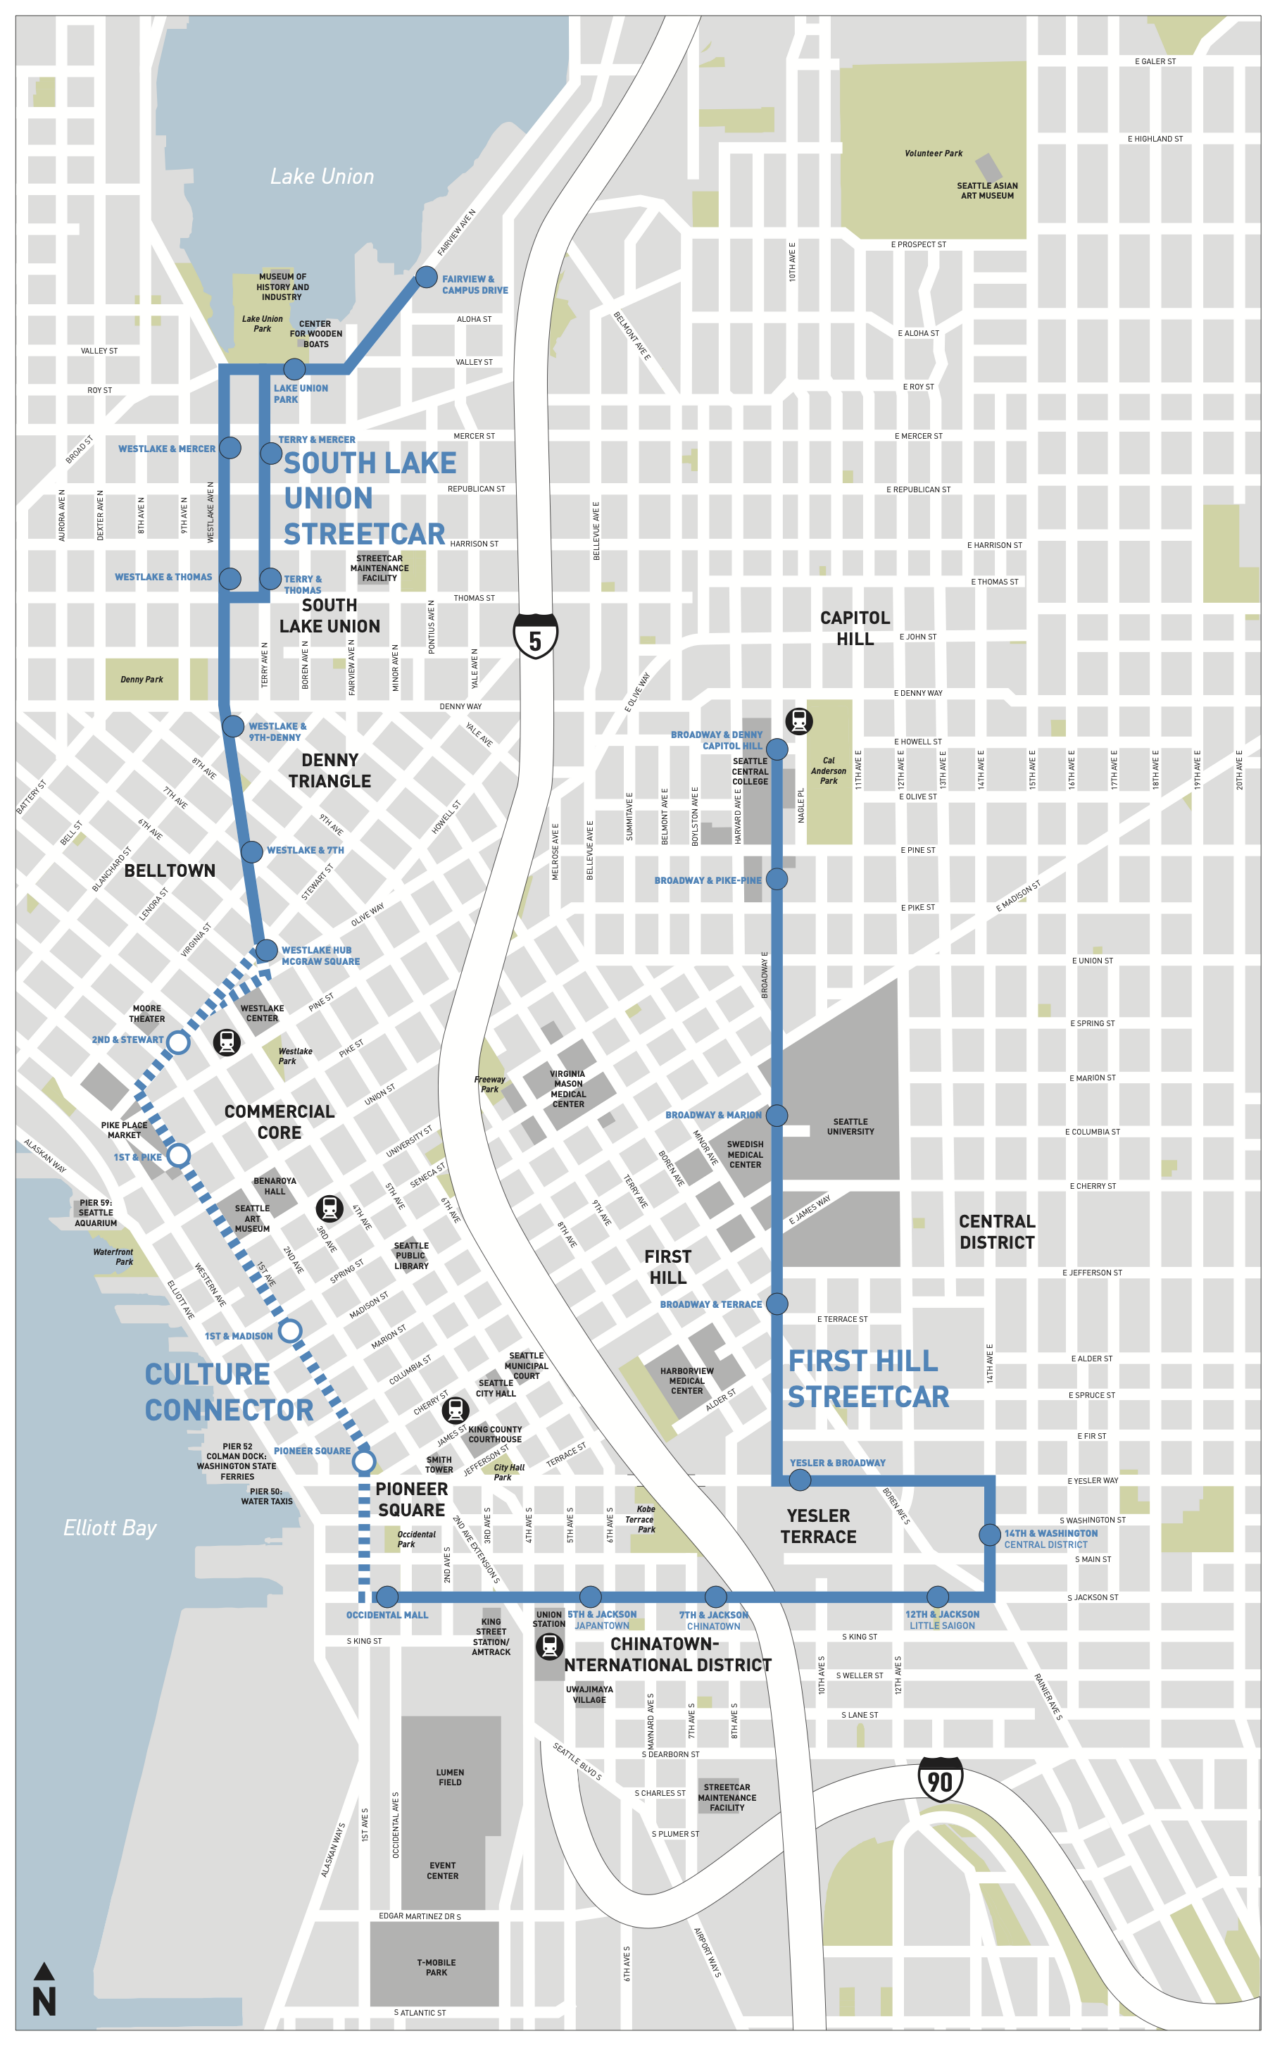 Map of the Culture Connector connecting the SLU and First Hill streetcar lines. The existing lines are shown in solid blue lines, with the Culture Connector route in a dashed blue line.